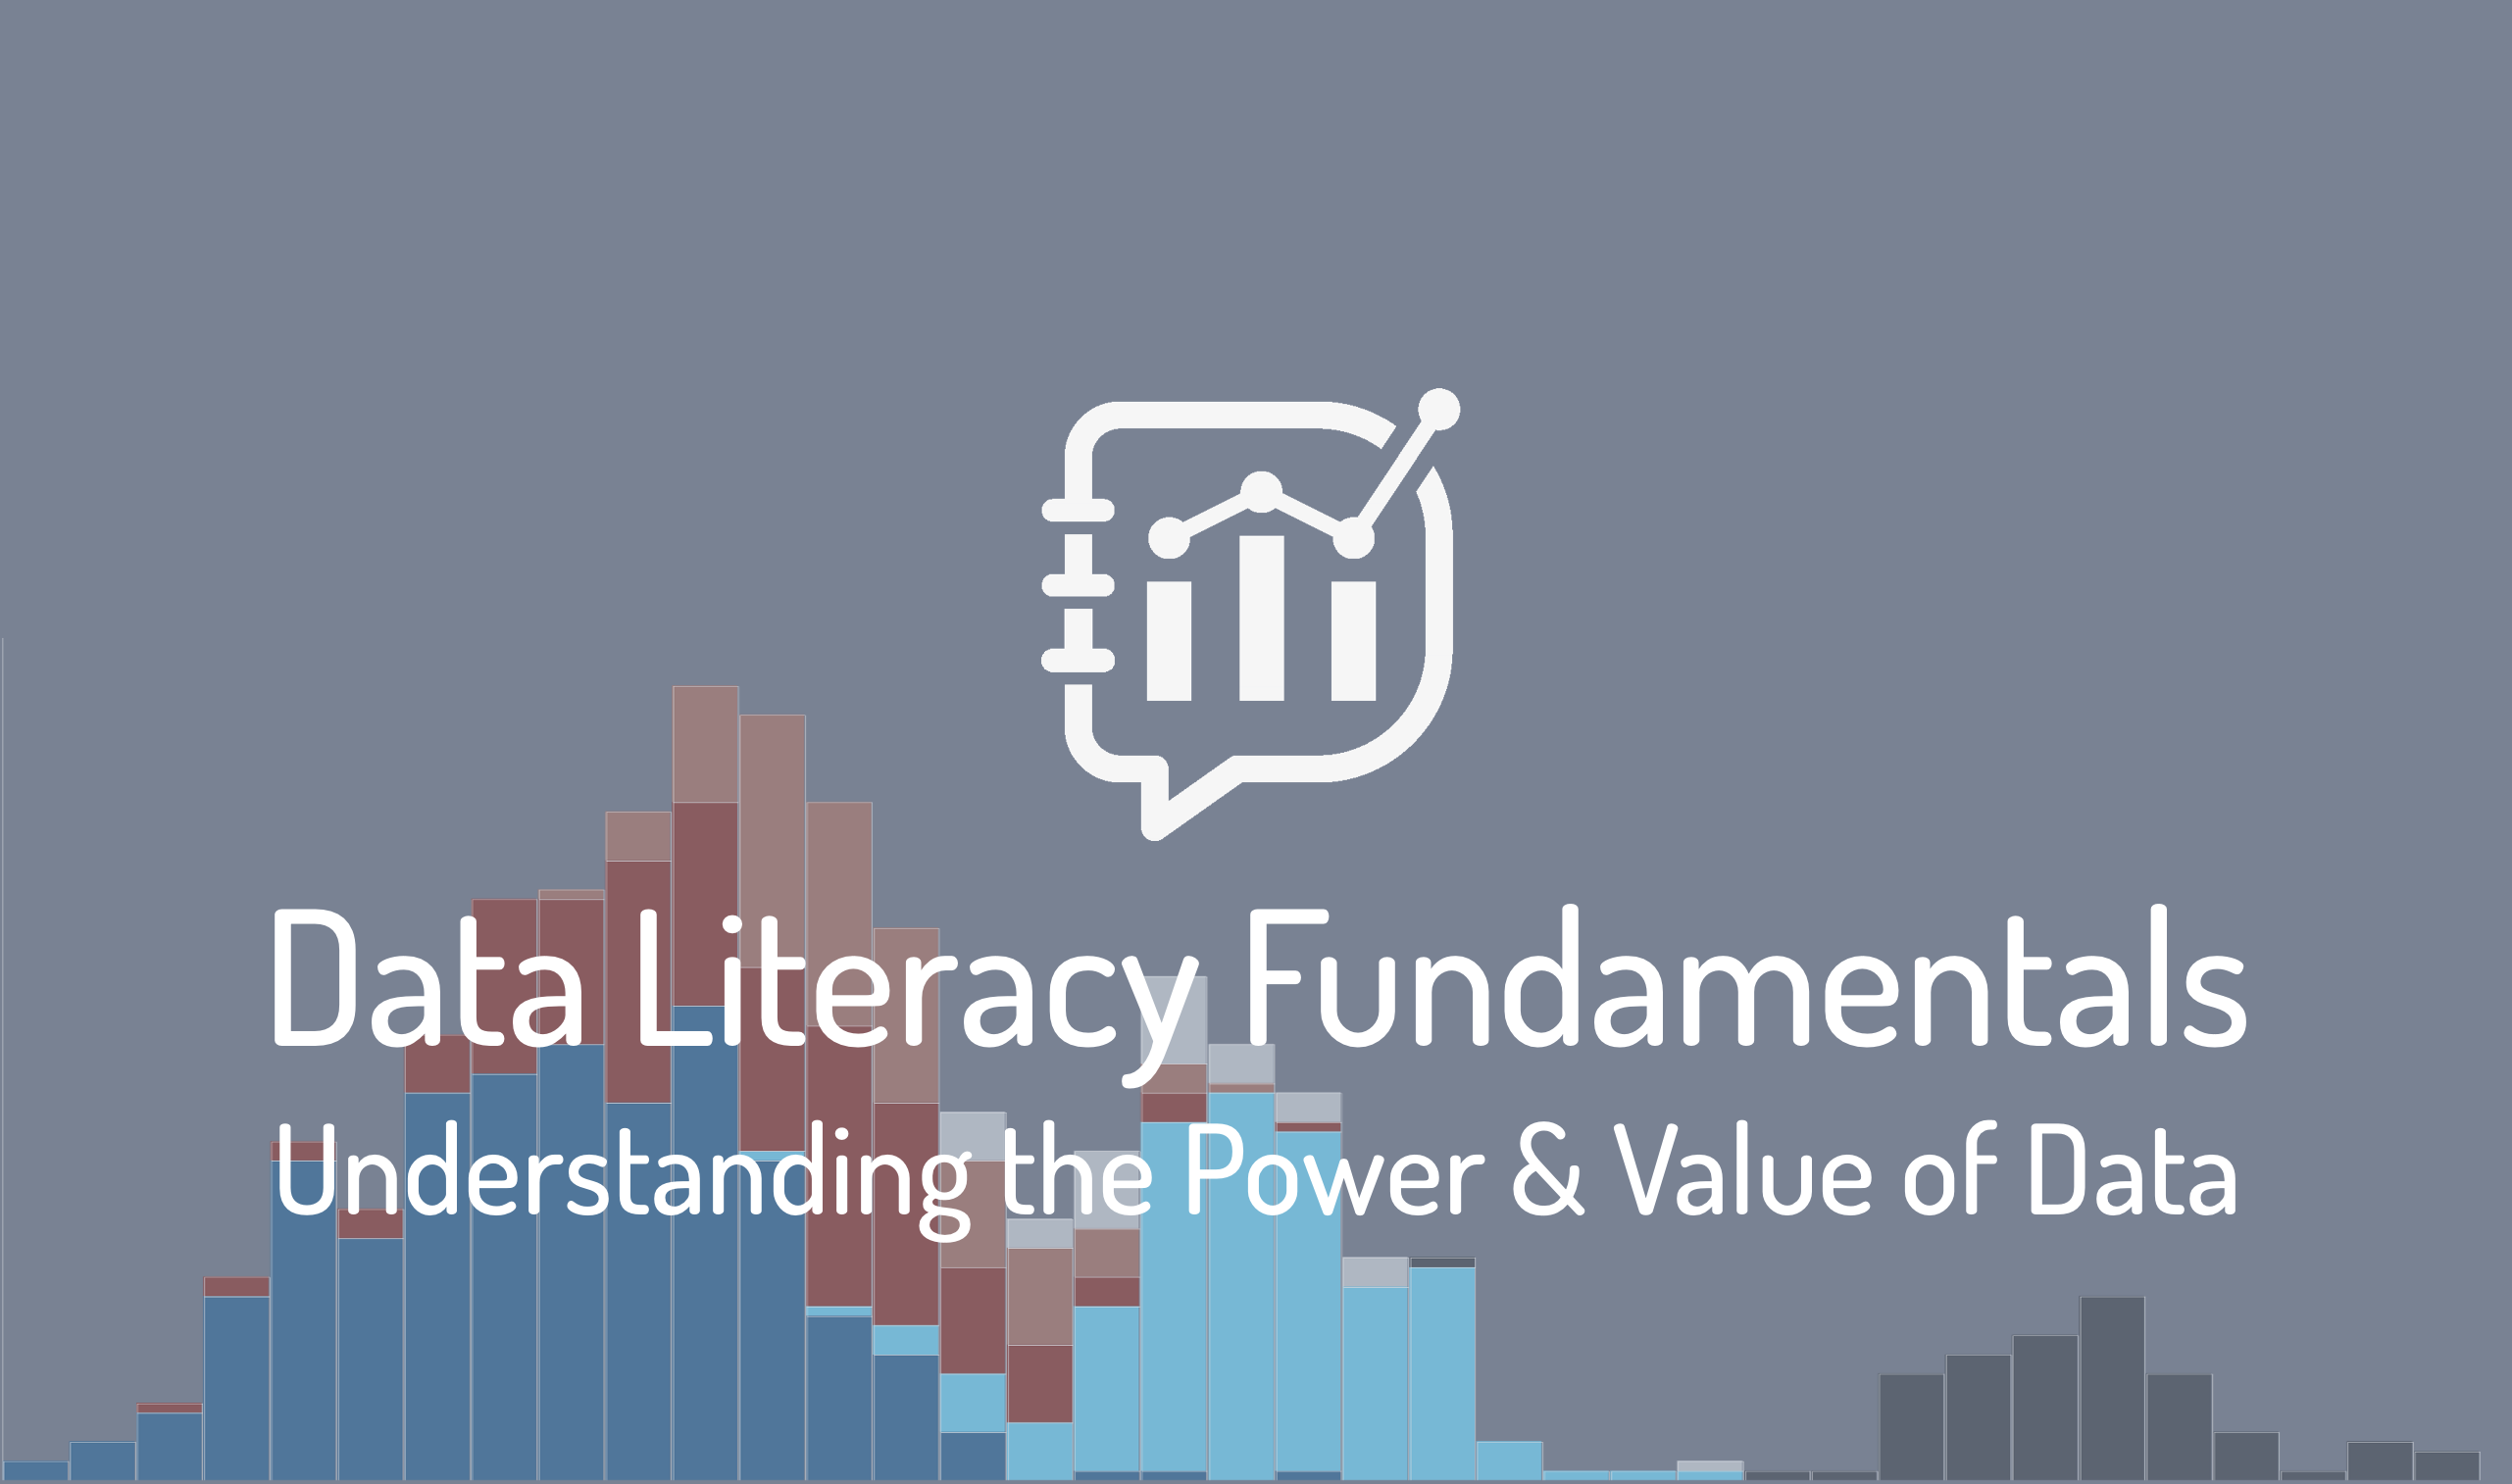 Featured image for the data literacy fundamentals on-demand course. Grey background with stacked bar chart. White data literacy logo. Beneath in white text it reads data literacy fundamentals understanding the power and value of data.